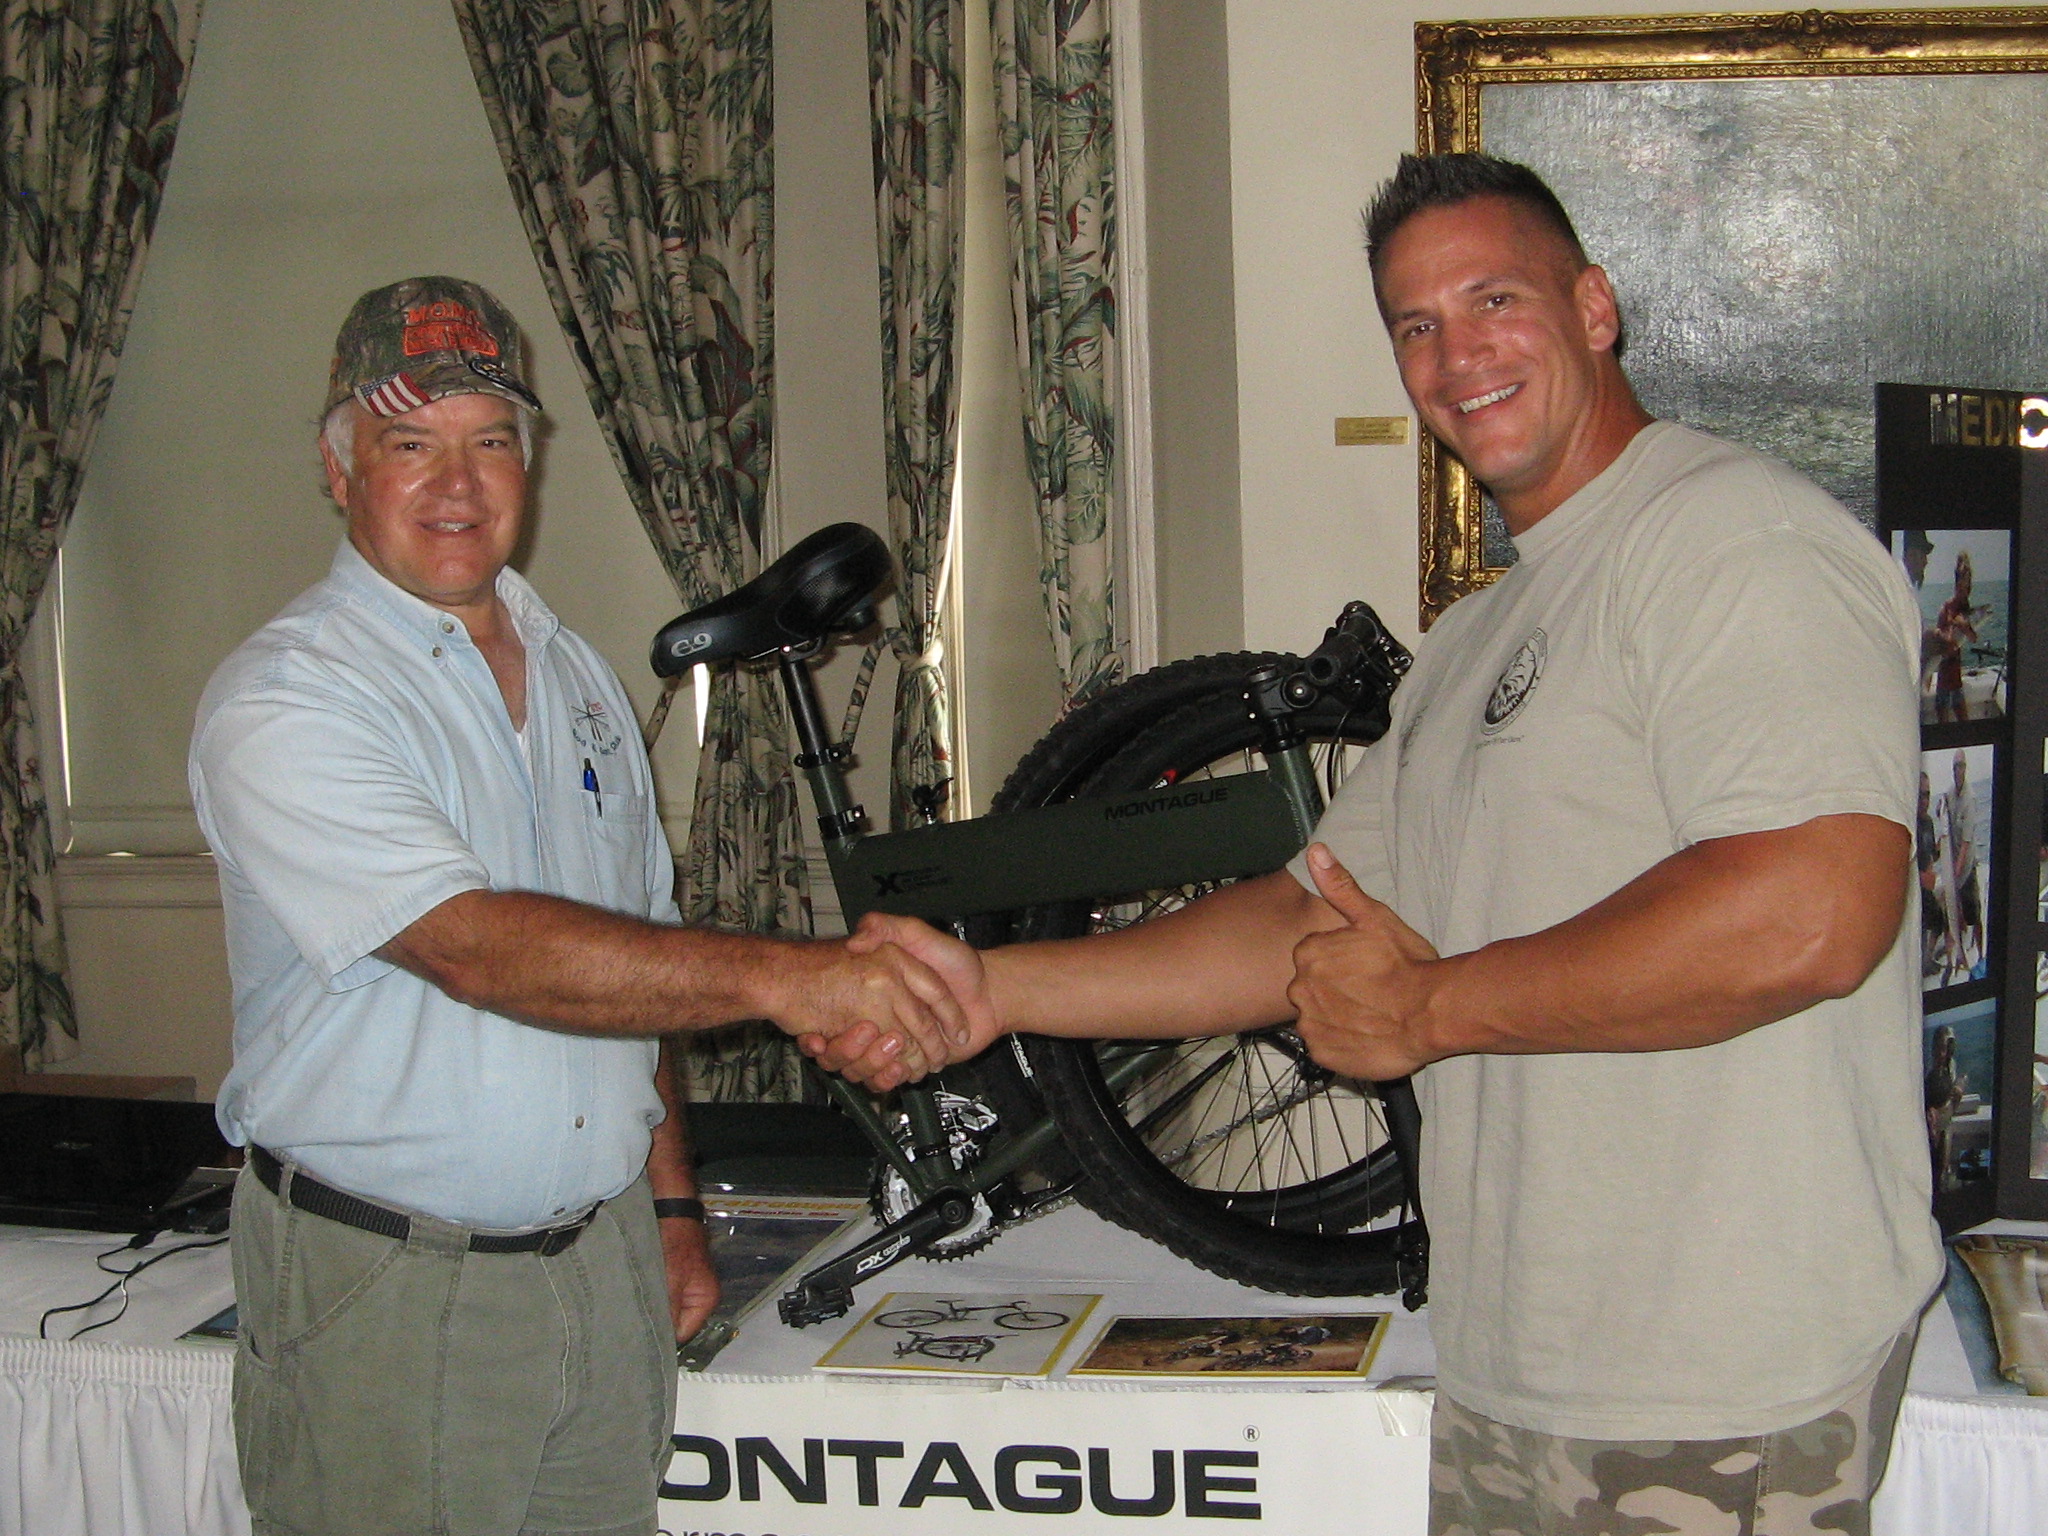 Montague folding bike for the operation injured soldiers